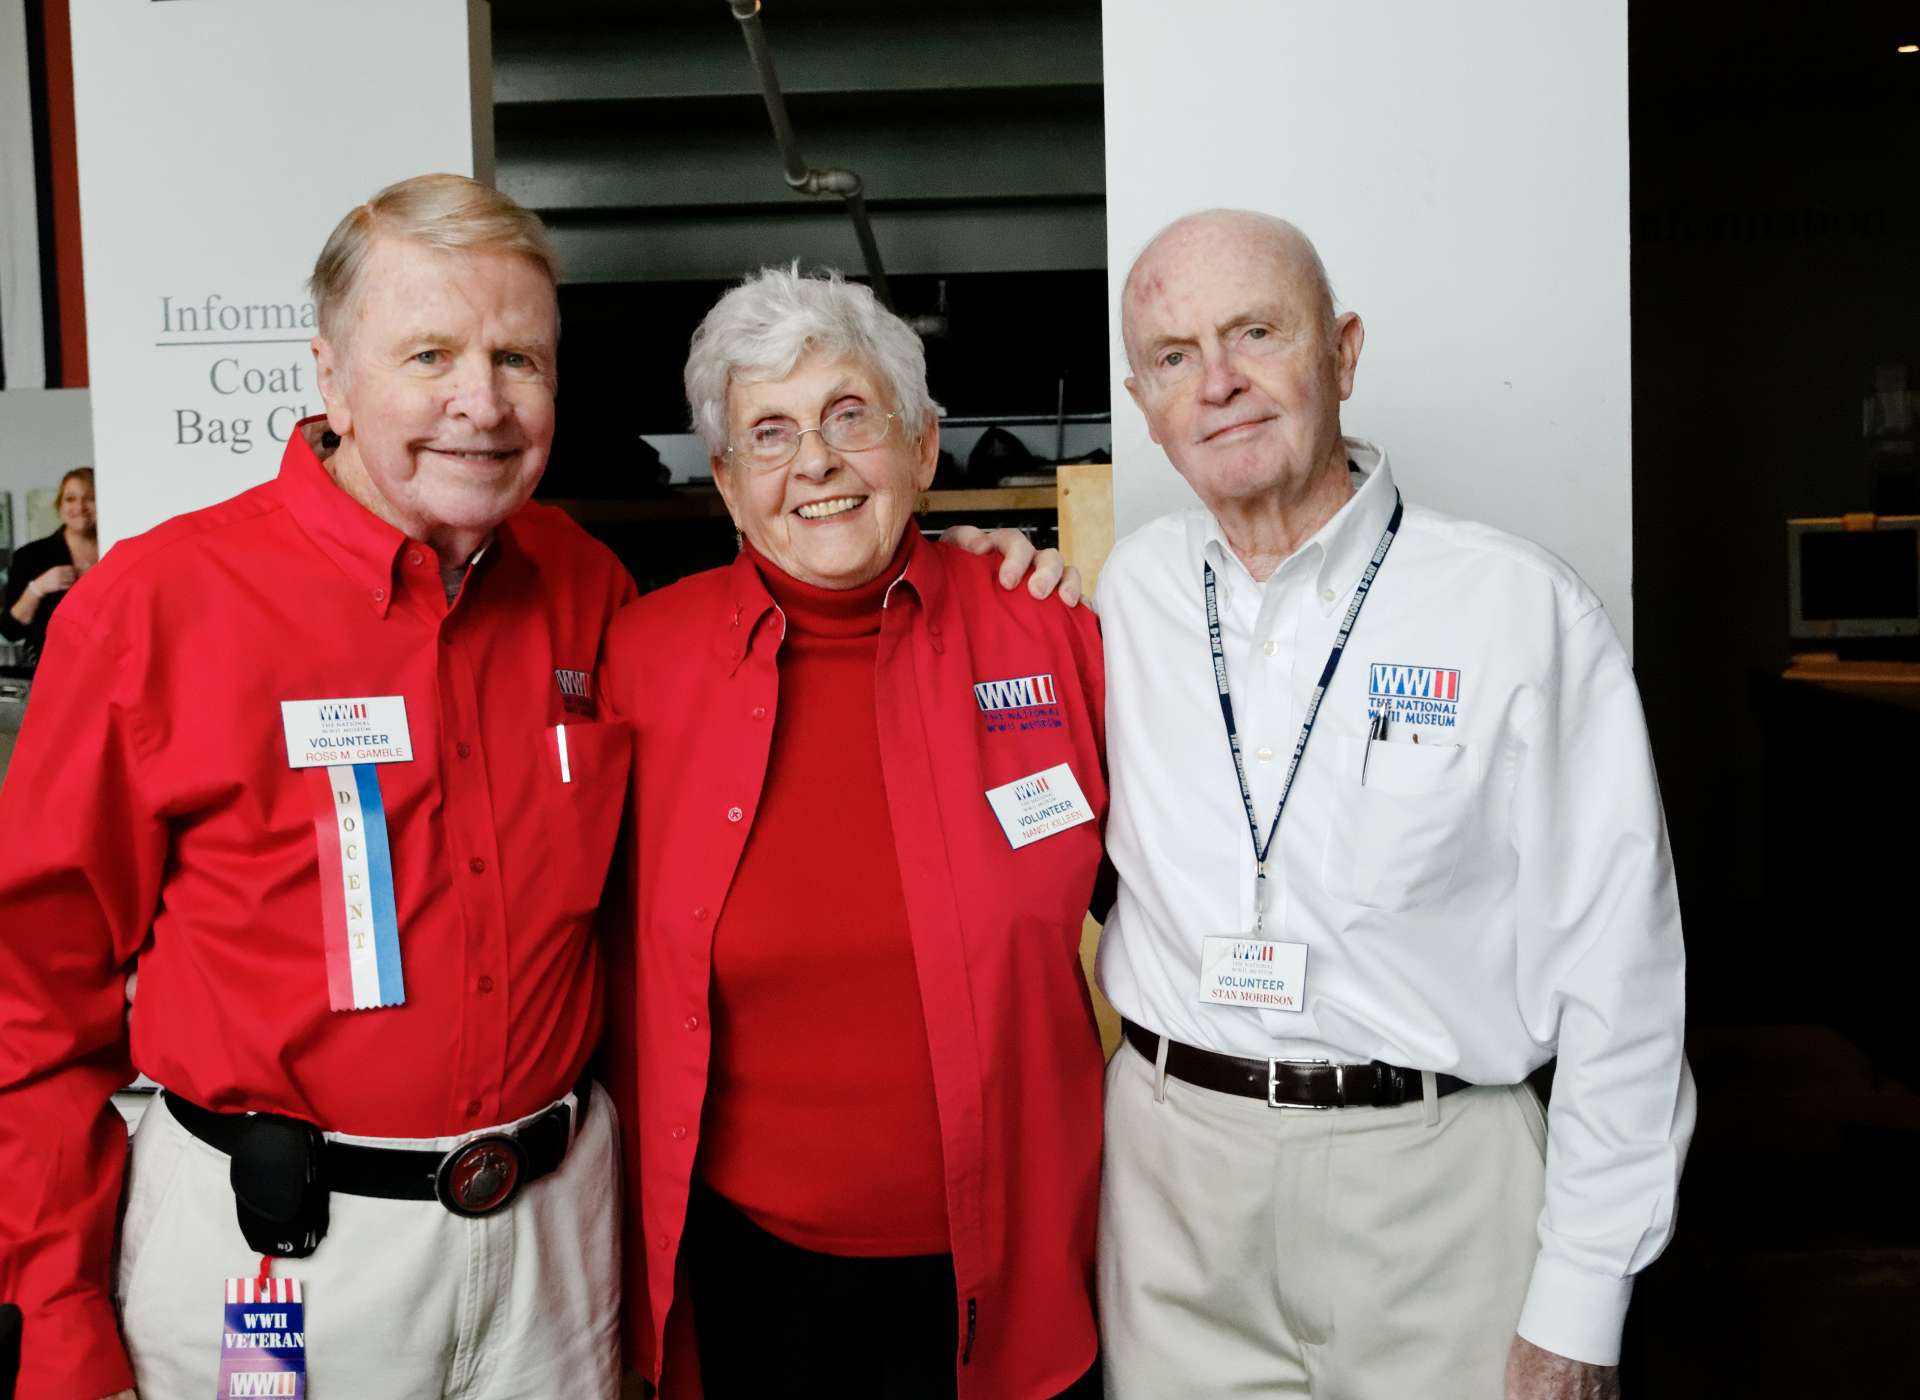 Volunteers at The National WWII Museum